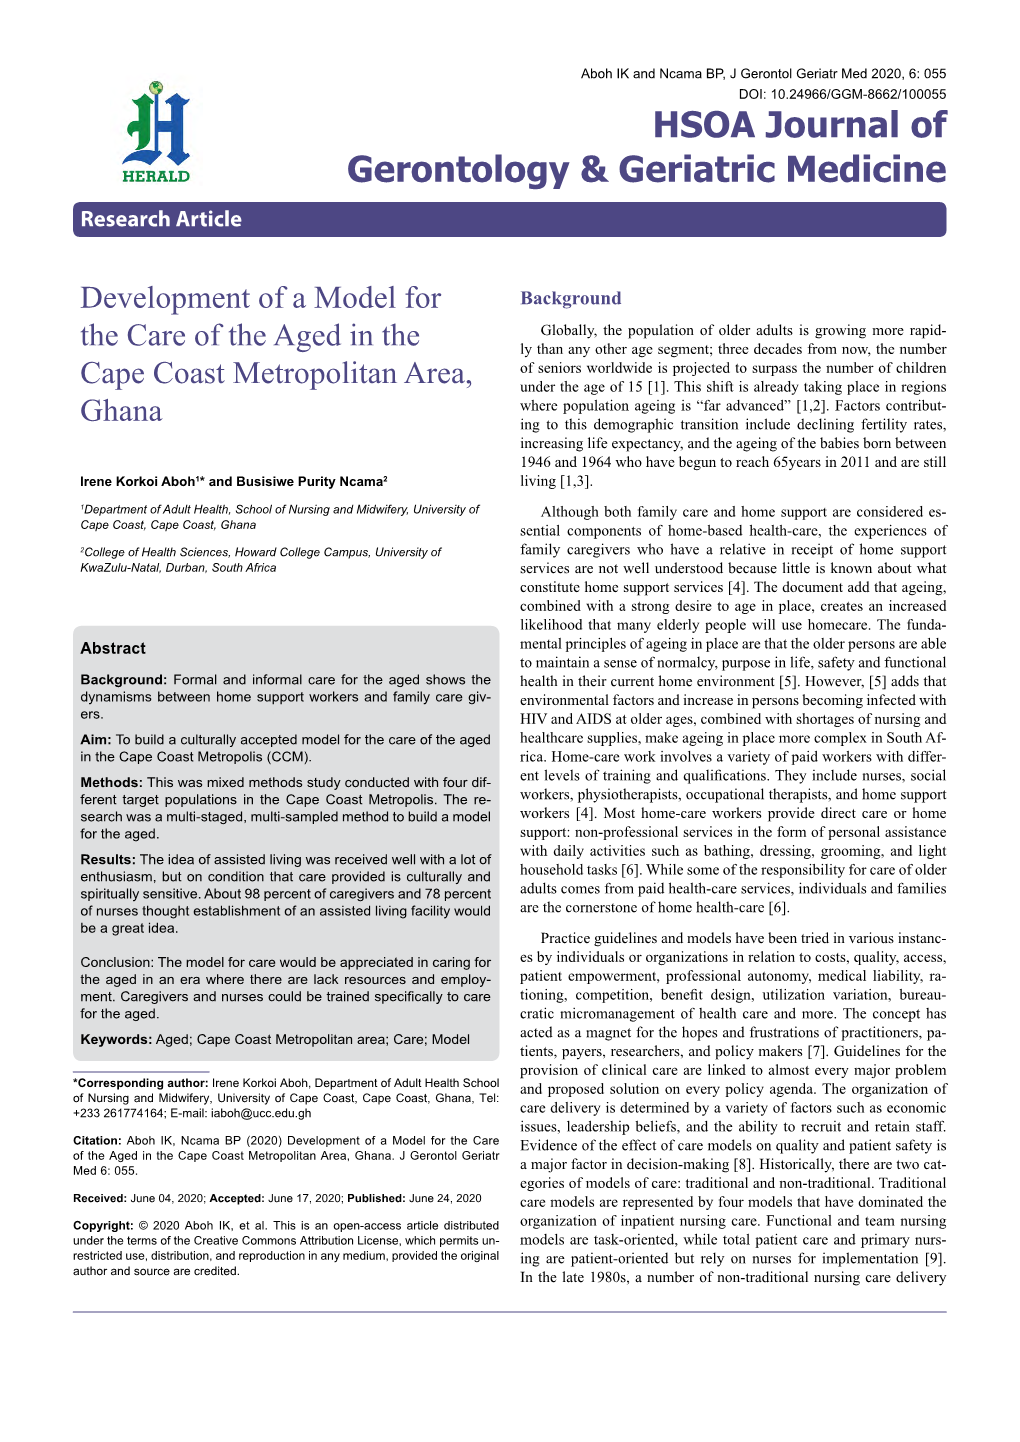 Development of a Model for the Care of the Aged in the Cape Coast Metropolitan Area, Ghana